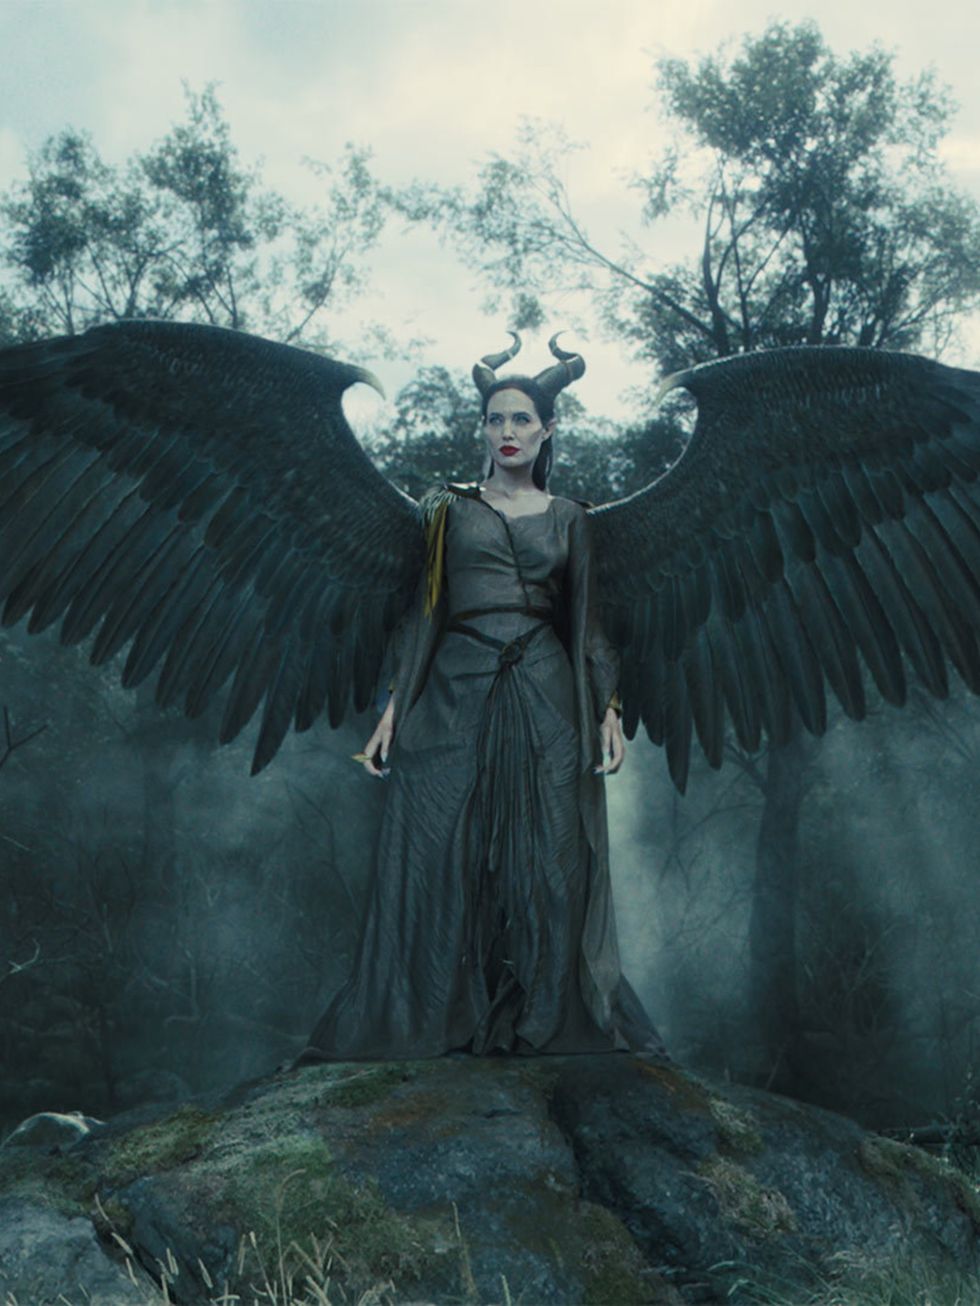 <p>Disney's <em>Maleficent</em>, the much anticipated re-imagined story of the wicked Queen from <em>Sleeping Beauty</em>, opens at the end of this month. It stars Angelina Jolie looking downright incredible and pretty fearsome in wings, horns and capes c